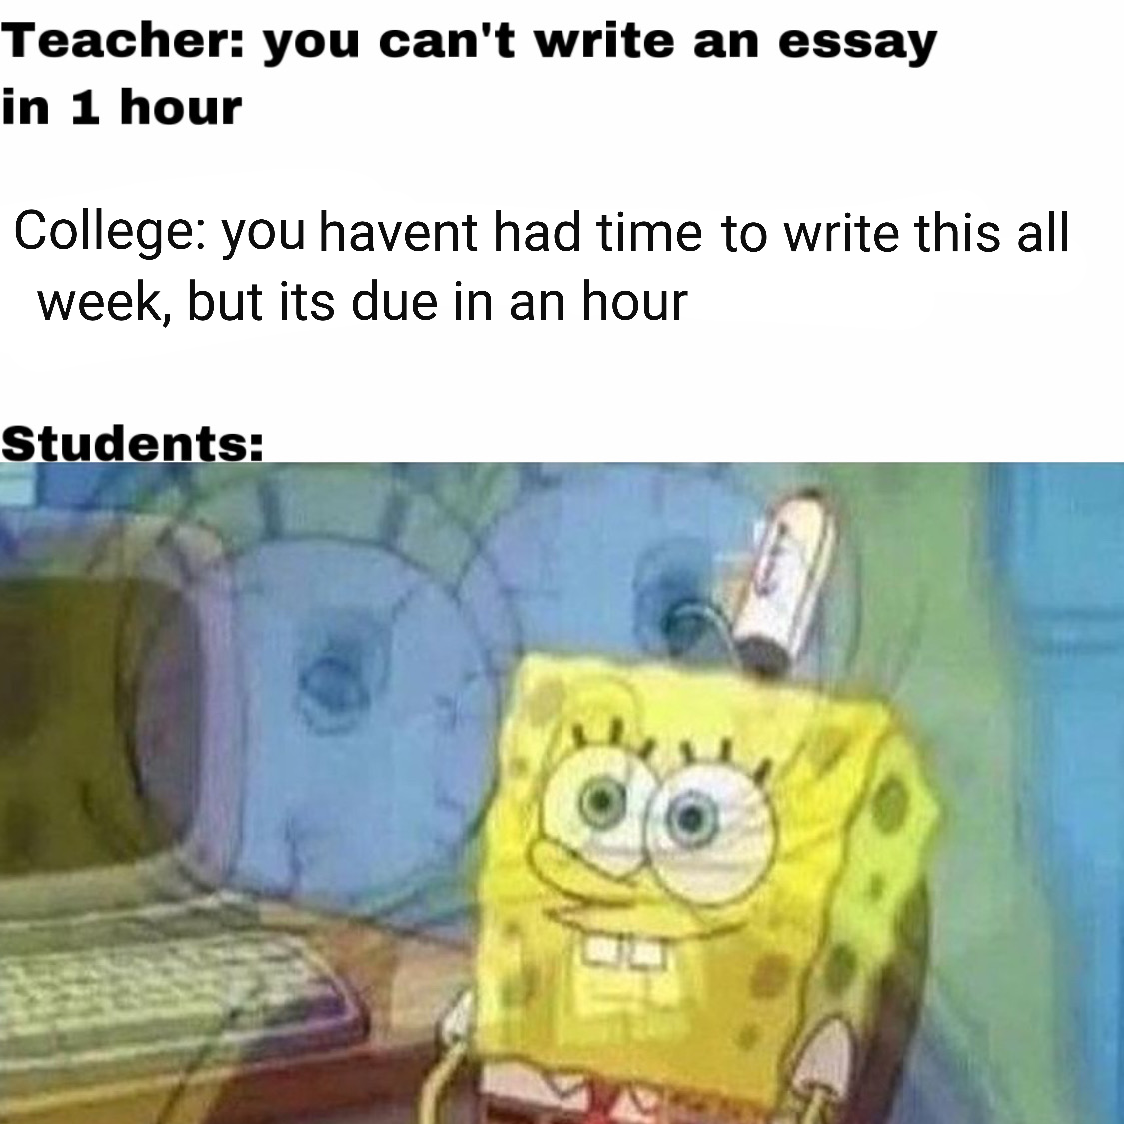 r/collegememes- college dank memes - spongebob screaming inside - Teacher you can't write an essay in 1 hour College you havent had time to write this all week, but its due in an hour Students